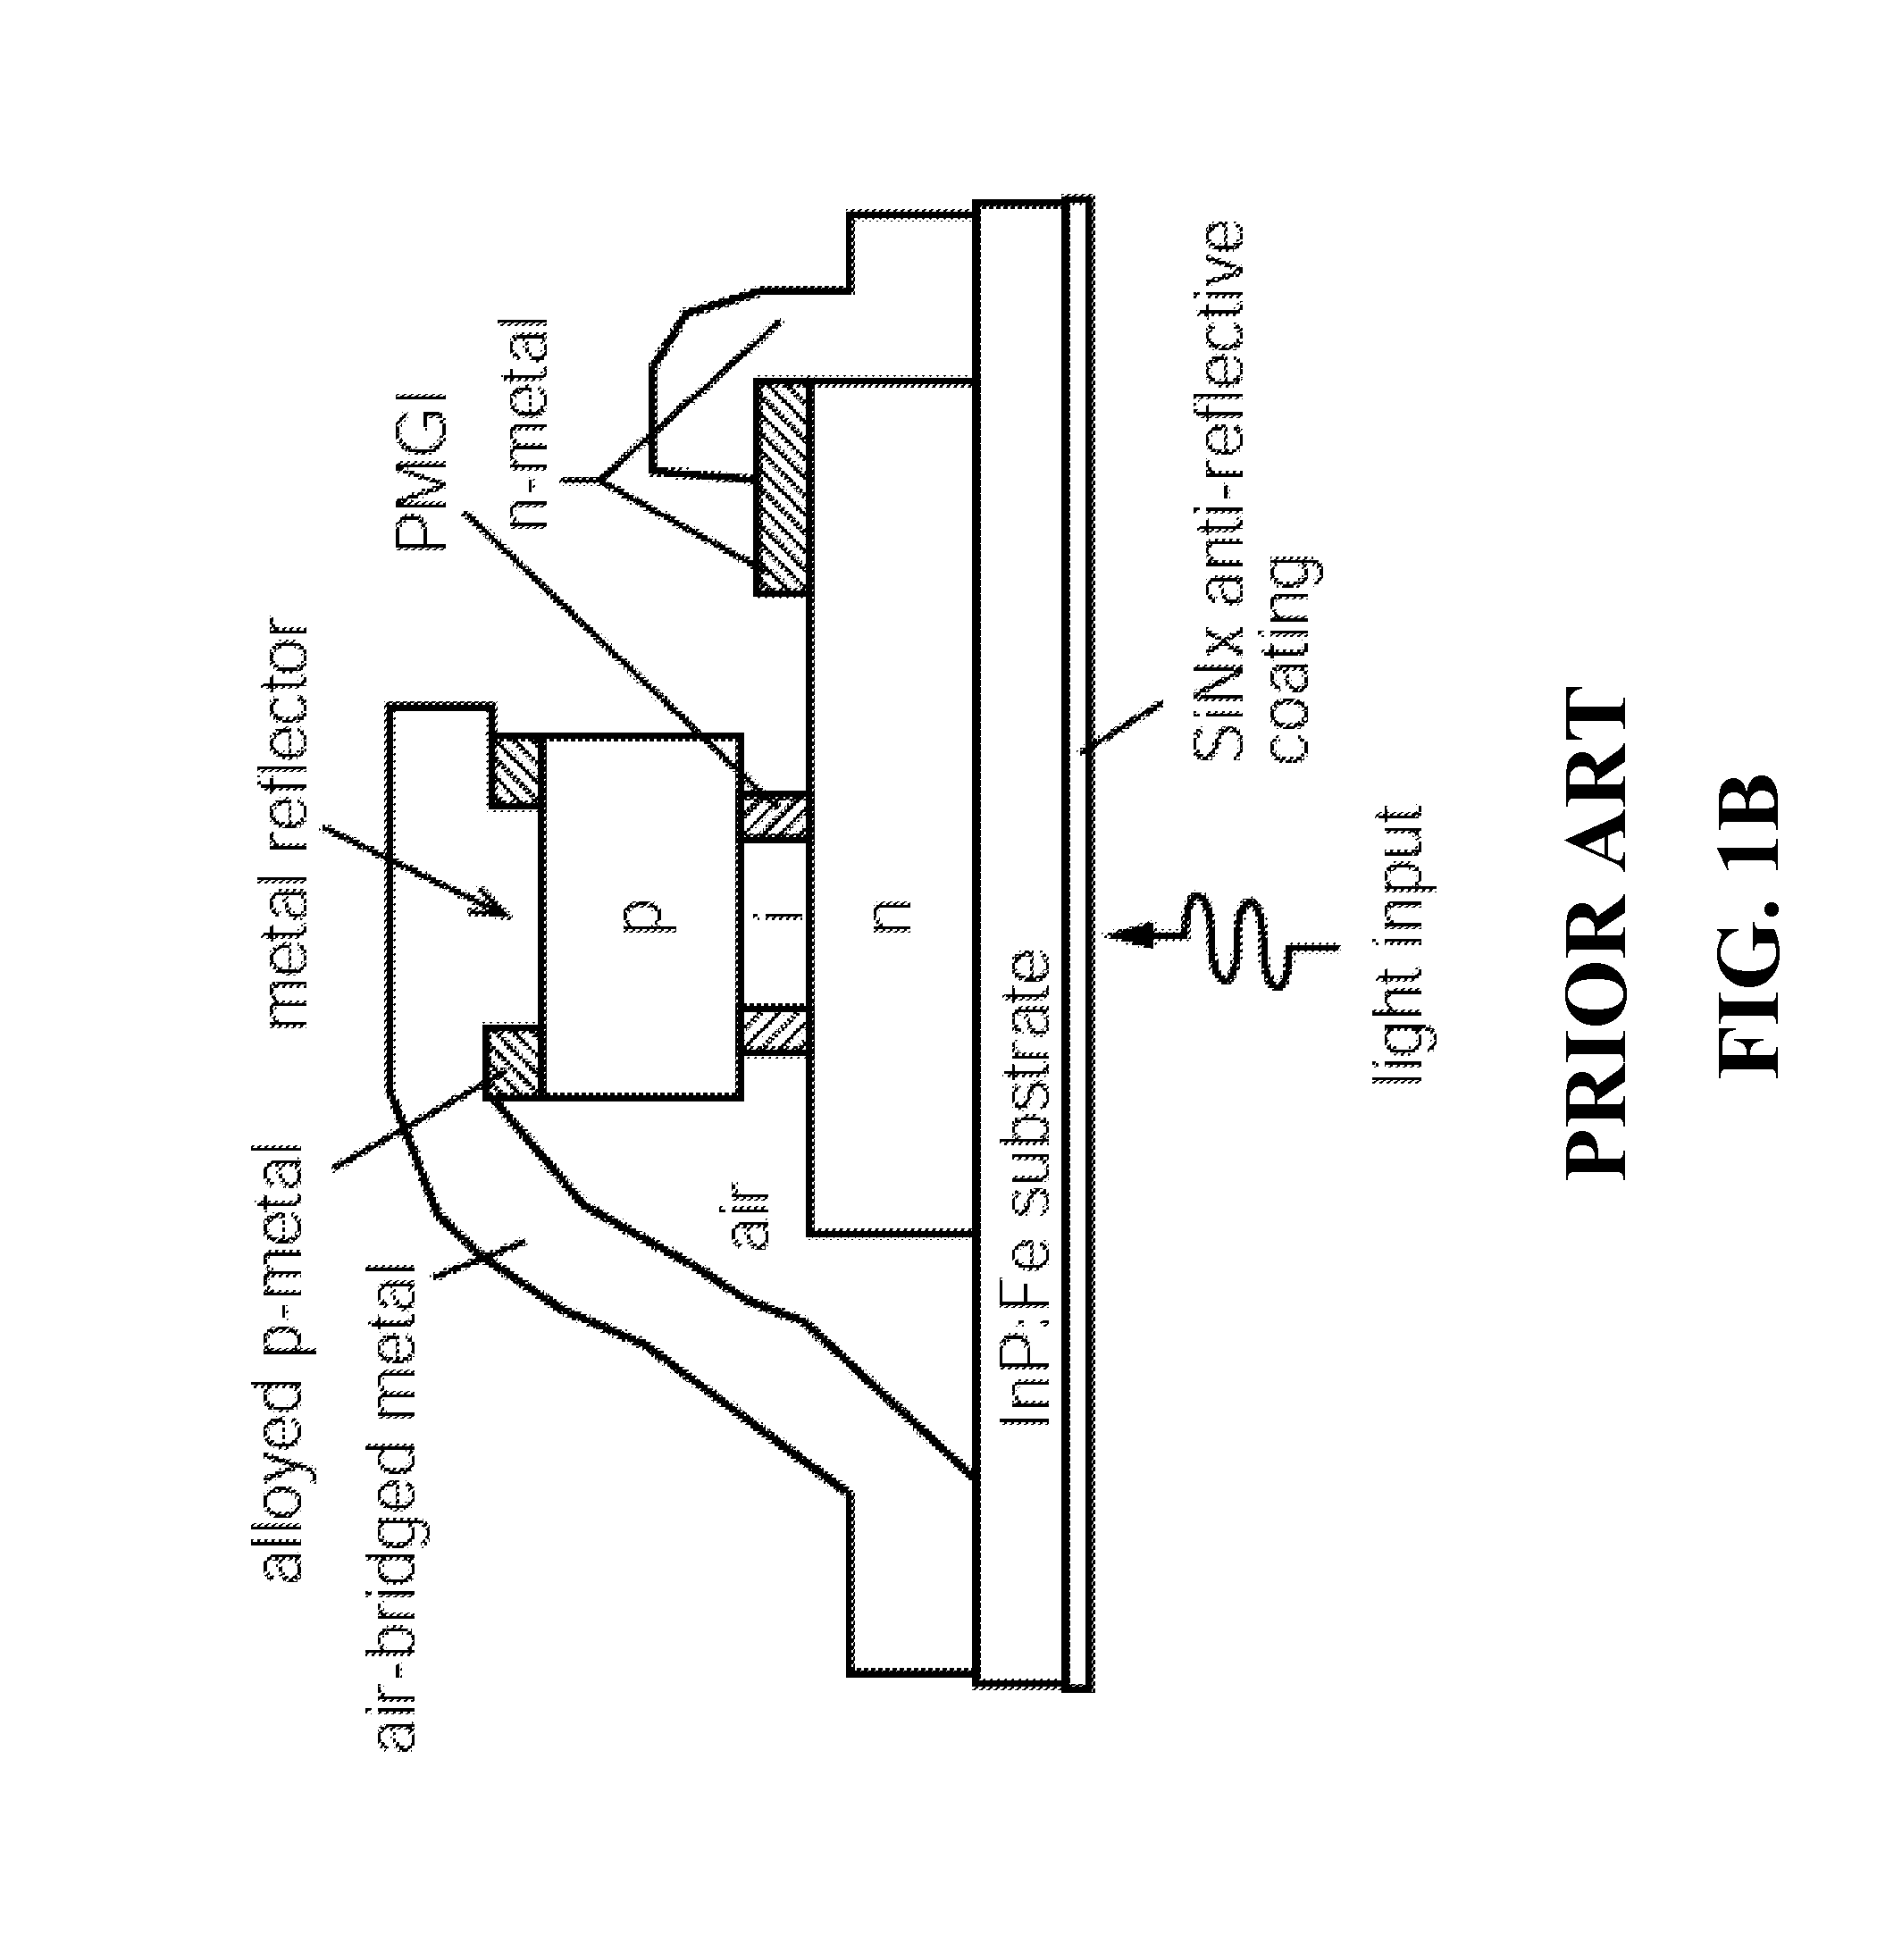 Multispectral imaging device and manufacturing thereof